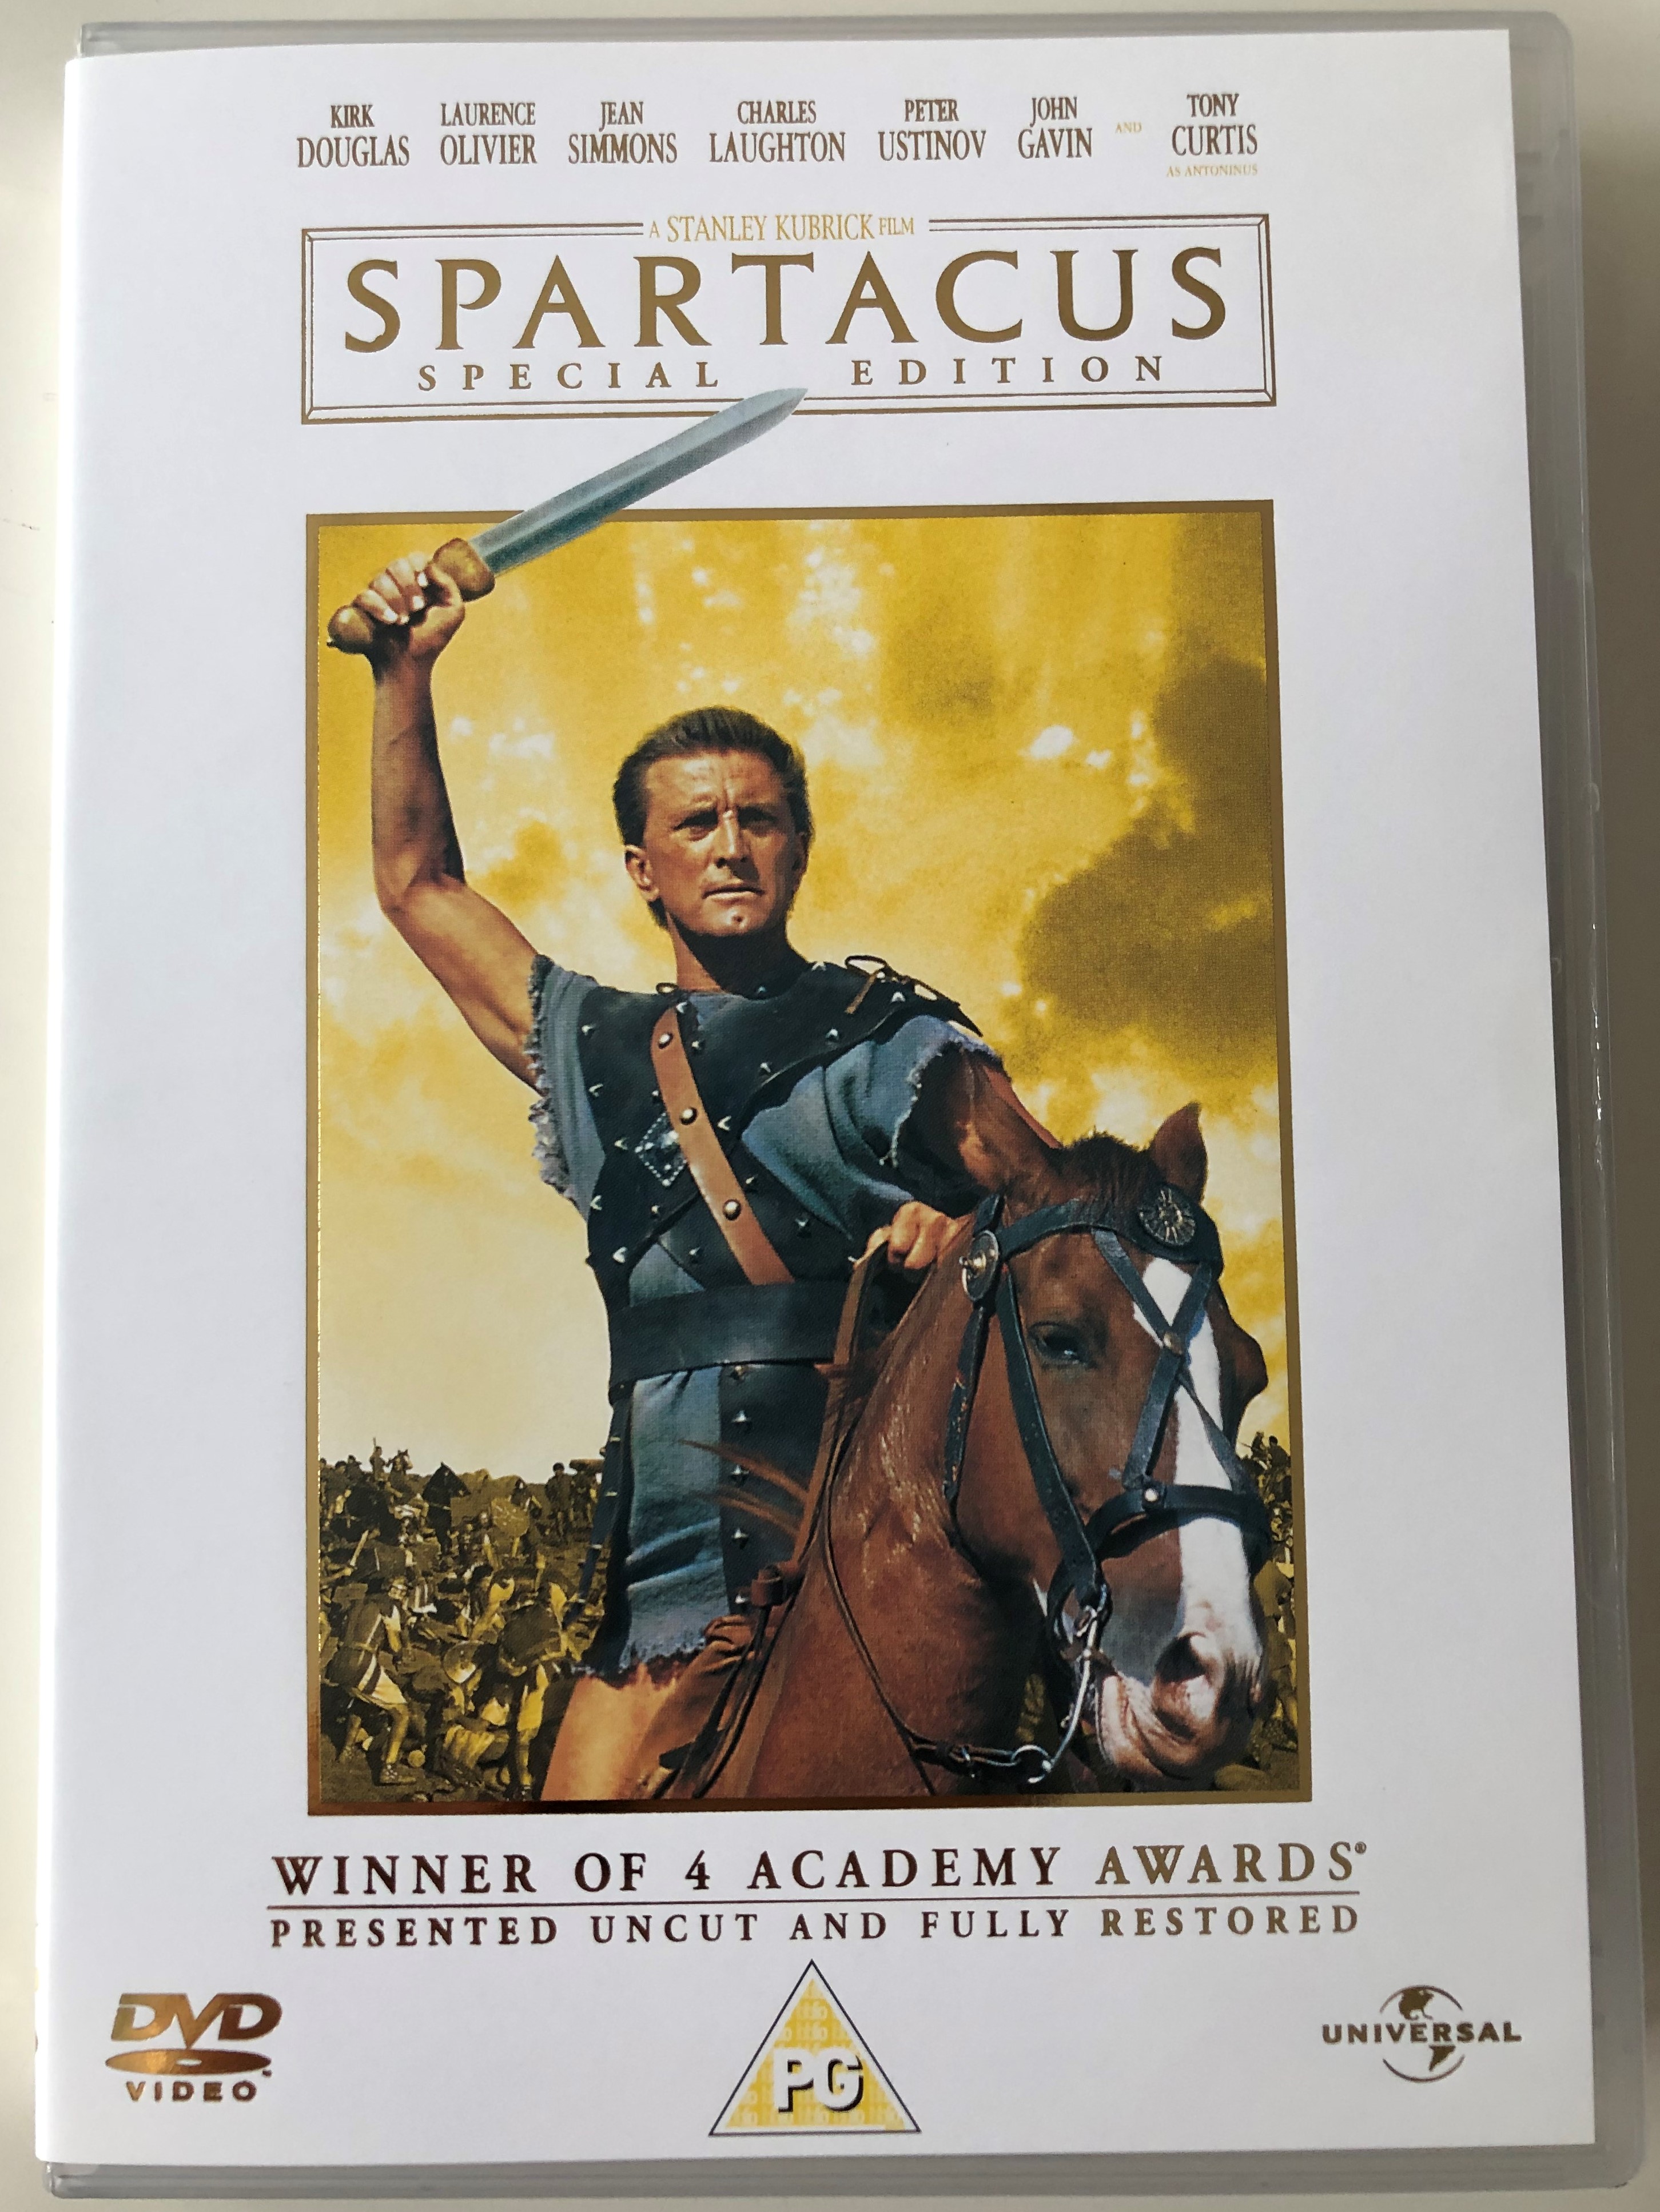 Spartacus 1960 Dvd 2 Disc Special Edition Directed By Stanley Kubrick